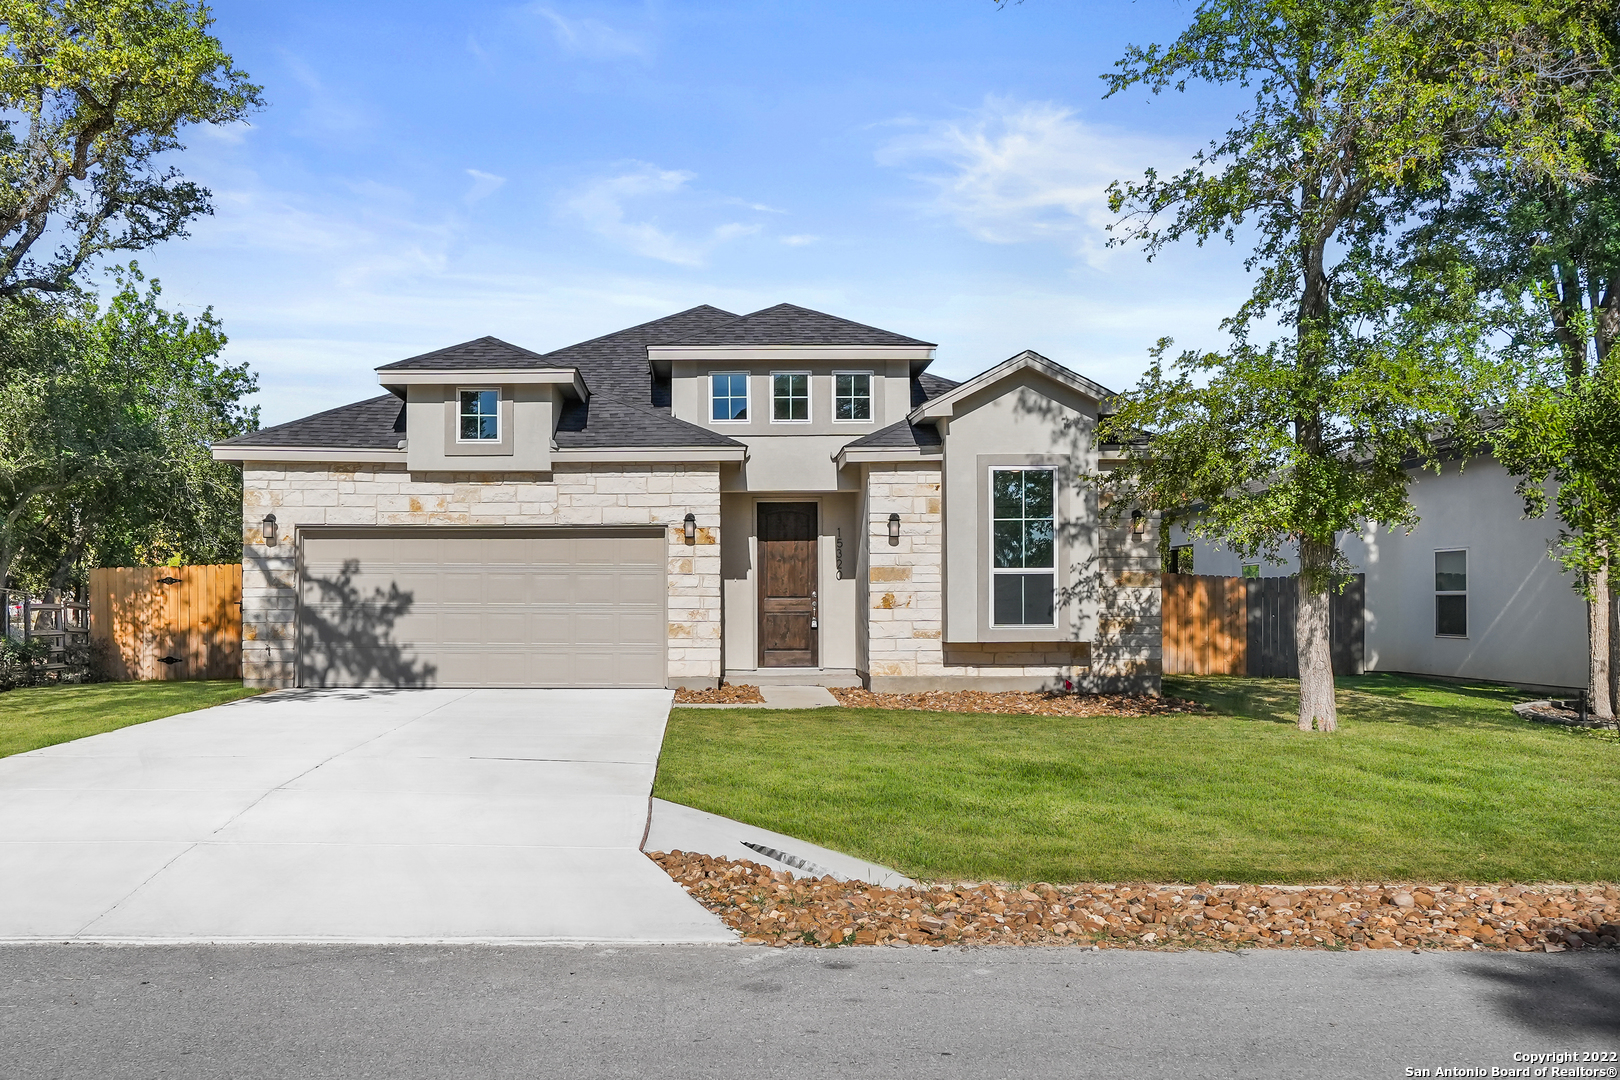 BEAUTIFUL NEW HOME IN THIS BRAND NEW PHASE OF COUNTRY CLUB ESTATES SUBDIVISION. SHORT WALKING DISTANCE TO THE RIVER. STICK BUILT CONSTRUCTION (NO PREFAB), 15FT GRAND ENTRY FOYER W/RECESSED LIGHTS AND PLANT SHELVES, HUGE 21 X 19 LIVING ROOM, DECROTIVE ARCHES & NICHES, WAGON WHEEL KITCHEN, 3 CM GRANITE COUNTERS, WOOD CABINETS W/ SOFT HINGE CLOSE, LRD DISC LIGHTING, GE STAINLESS APPLIANCES-MICROWAVE, STOVE/OVEN AND DISHWASHER, SATIN NICKLE FINISH MOEN FAUCETS, SATIN NICKLE HARDWARE & FIXTURES, 17 X 14 OVERSIZED MSTR BED W/ HEADBOARD NICHE, 5X4 SEPERATE WALK-IN SHOWER W/ GLASS & TILE ENCLOSURE, SOAKER GARDEN TUB, 10 FT CEILINGS, 8 FT DOOR UPGRADE, CEILINGS TREATMENTS, DOUBLE PAINED PICTURE WINDOW W/ 4 X 4 WINDOW, 30 YEAR ROOF W/RIDGE VENT, IN WALL PEST SYTEM W/ BORA CARE, 3 SIDED STUCCO EXT, CERAMIUC TILE FLOORING. CEILING TREATMENTS THROUGHOUT PICTURE & TRANSOM WINDOWS IN THE MASTER BEDROOM, FULL SECURITYSYS W/ MOTION SENSOR, RADIANT BARRIER ROOF, CEILING FANS, MSTR. TRIPLE CLOSET TRIM OUT, PAINTED AND TEXTURED FINISHED OUT GARAGE.ADDED IRRIGATIOIN SYSTEM UPGRADE!! AMAZING FINISH OUTS. UP AND COMING AREA. THIS GORGEOUS NEW HOME IS A MUST SEE!!!